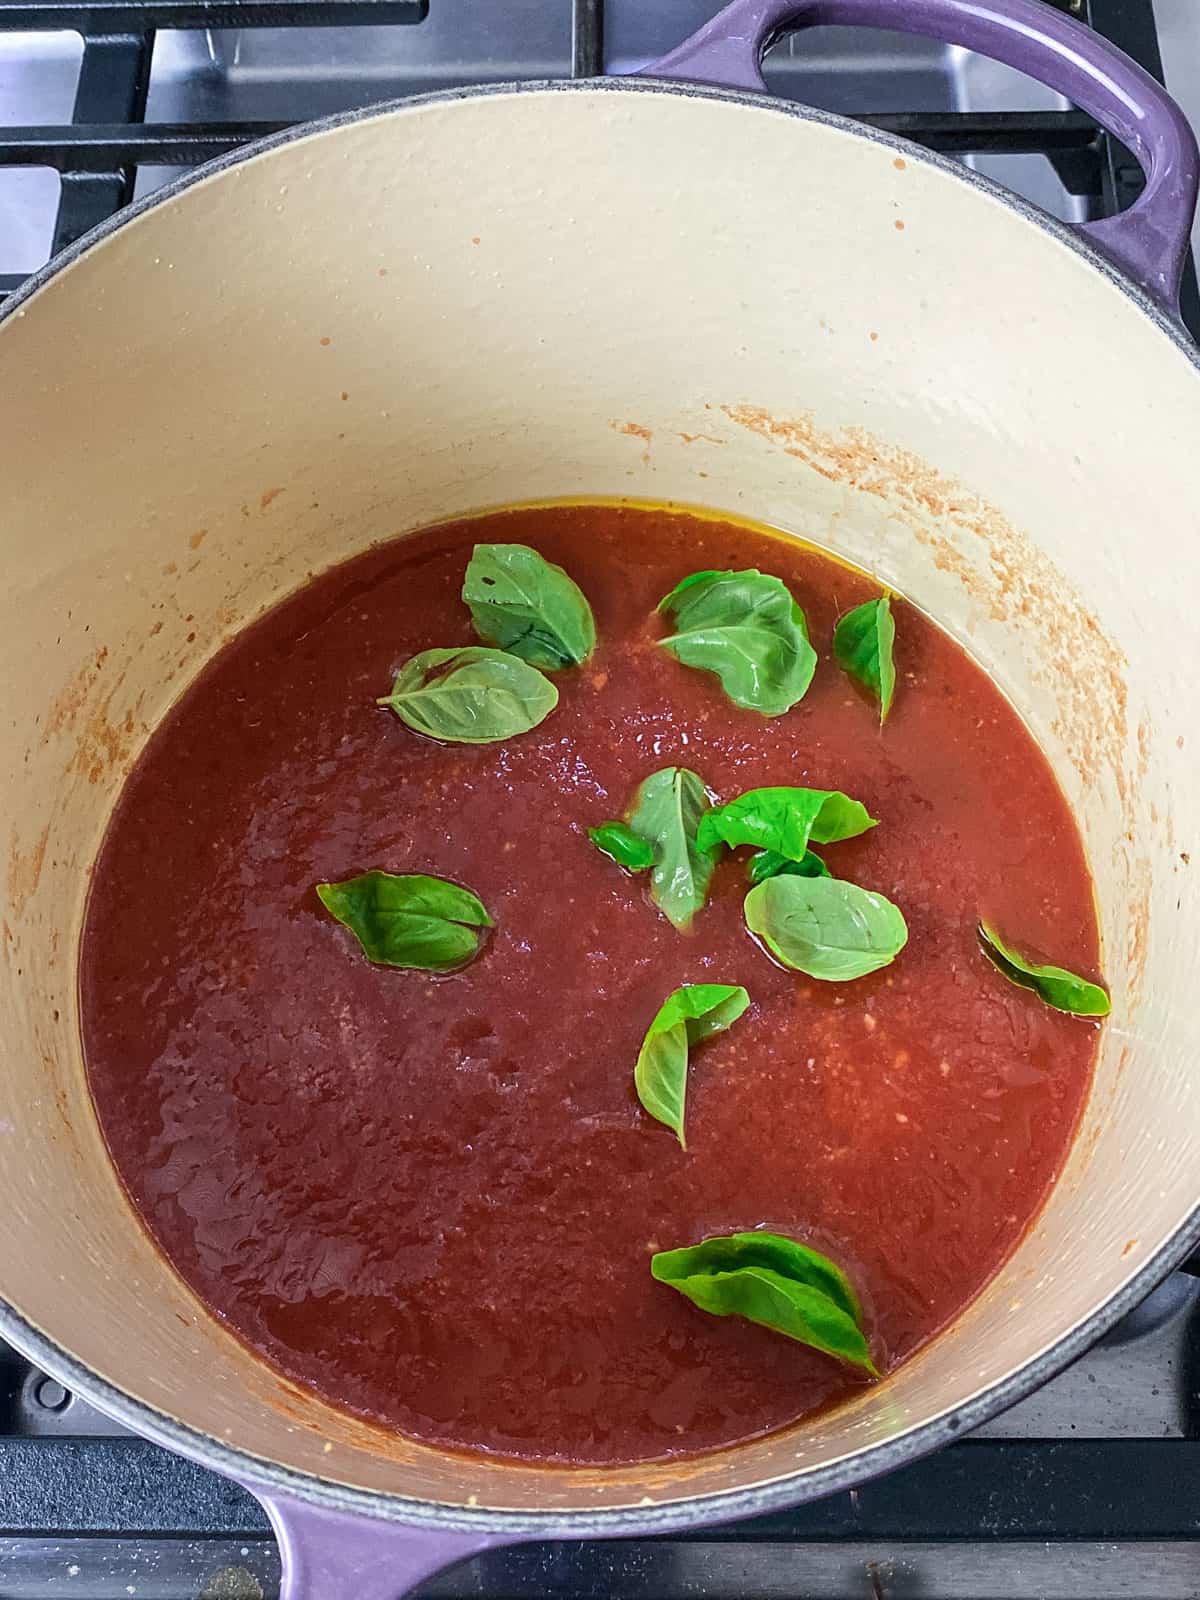 Add fresh basil leaves to the tomato sauce.